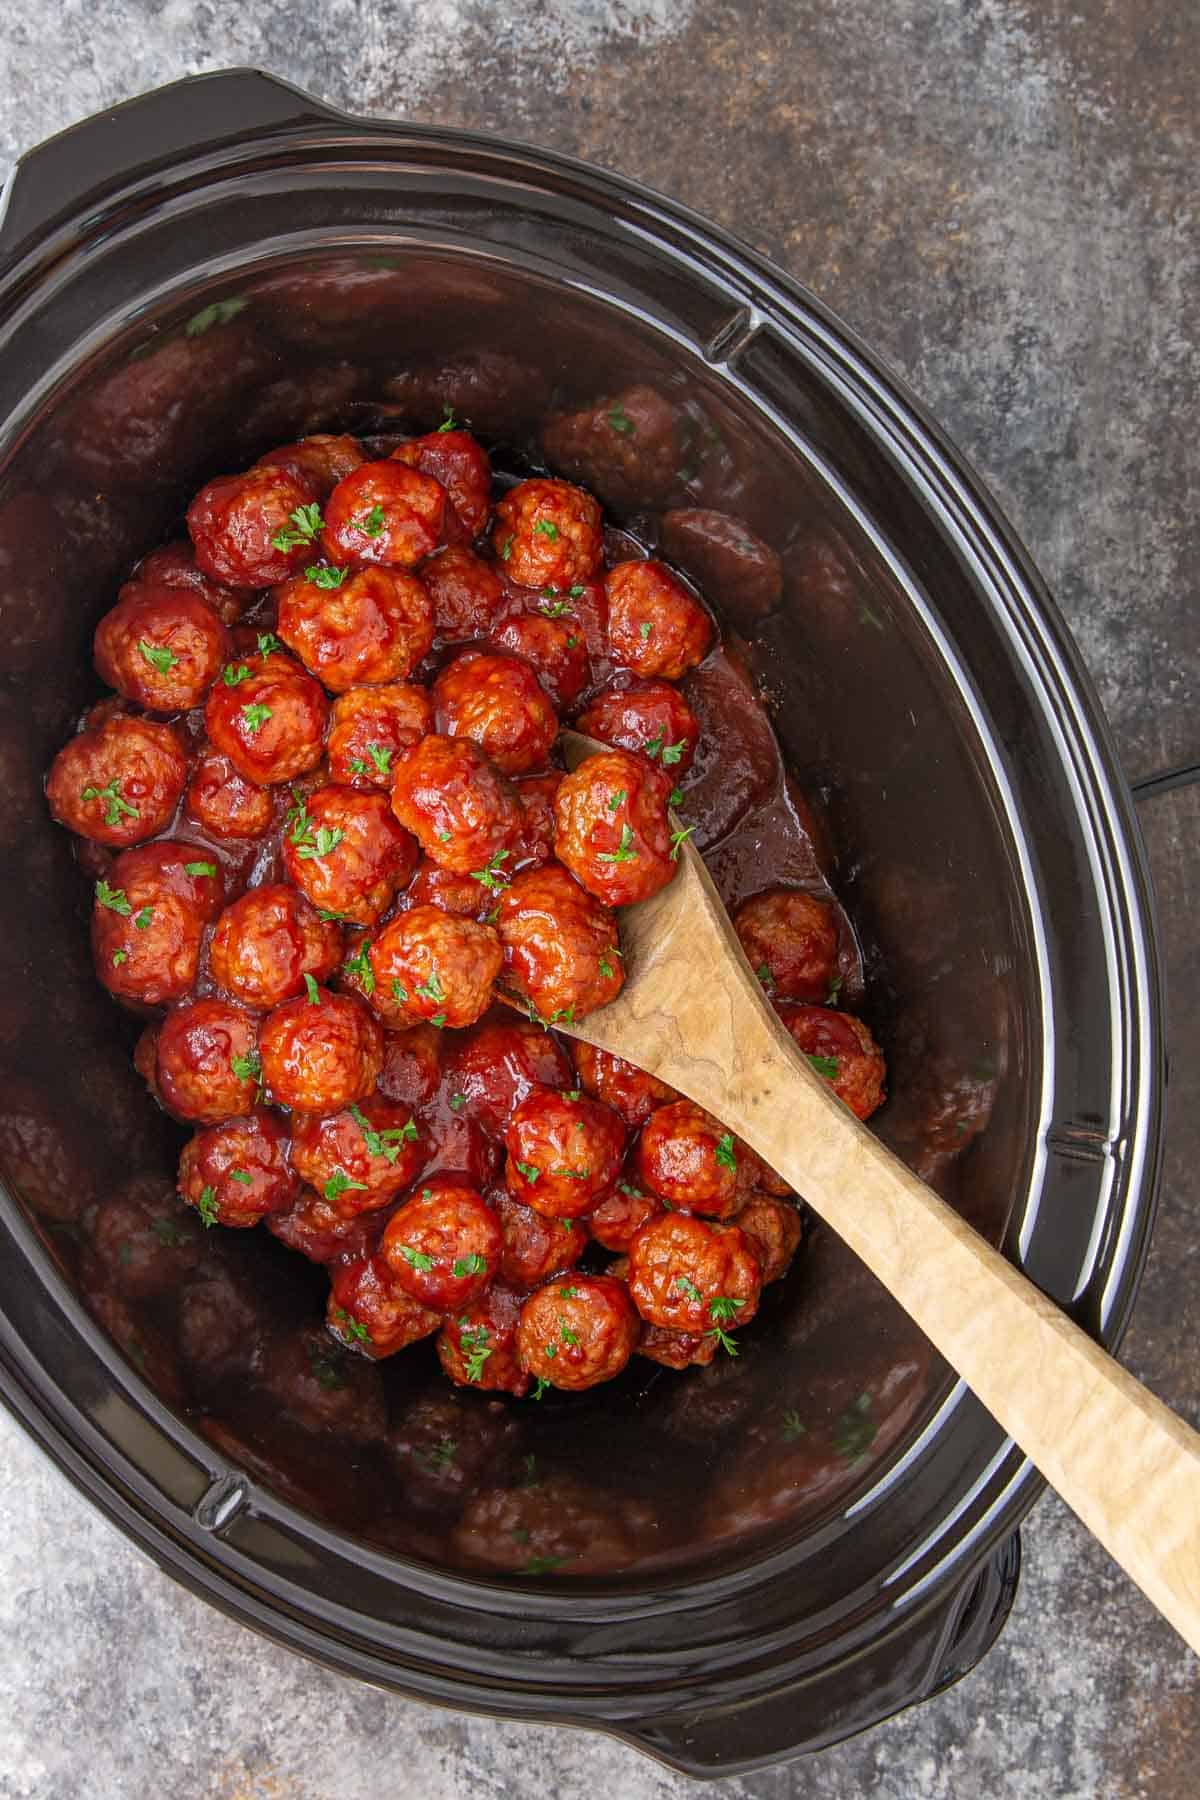 Cranberry meatballs in an oval crockpot with a wooden spoon.